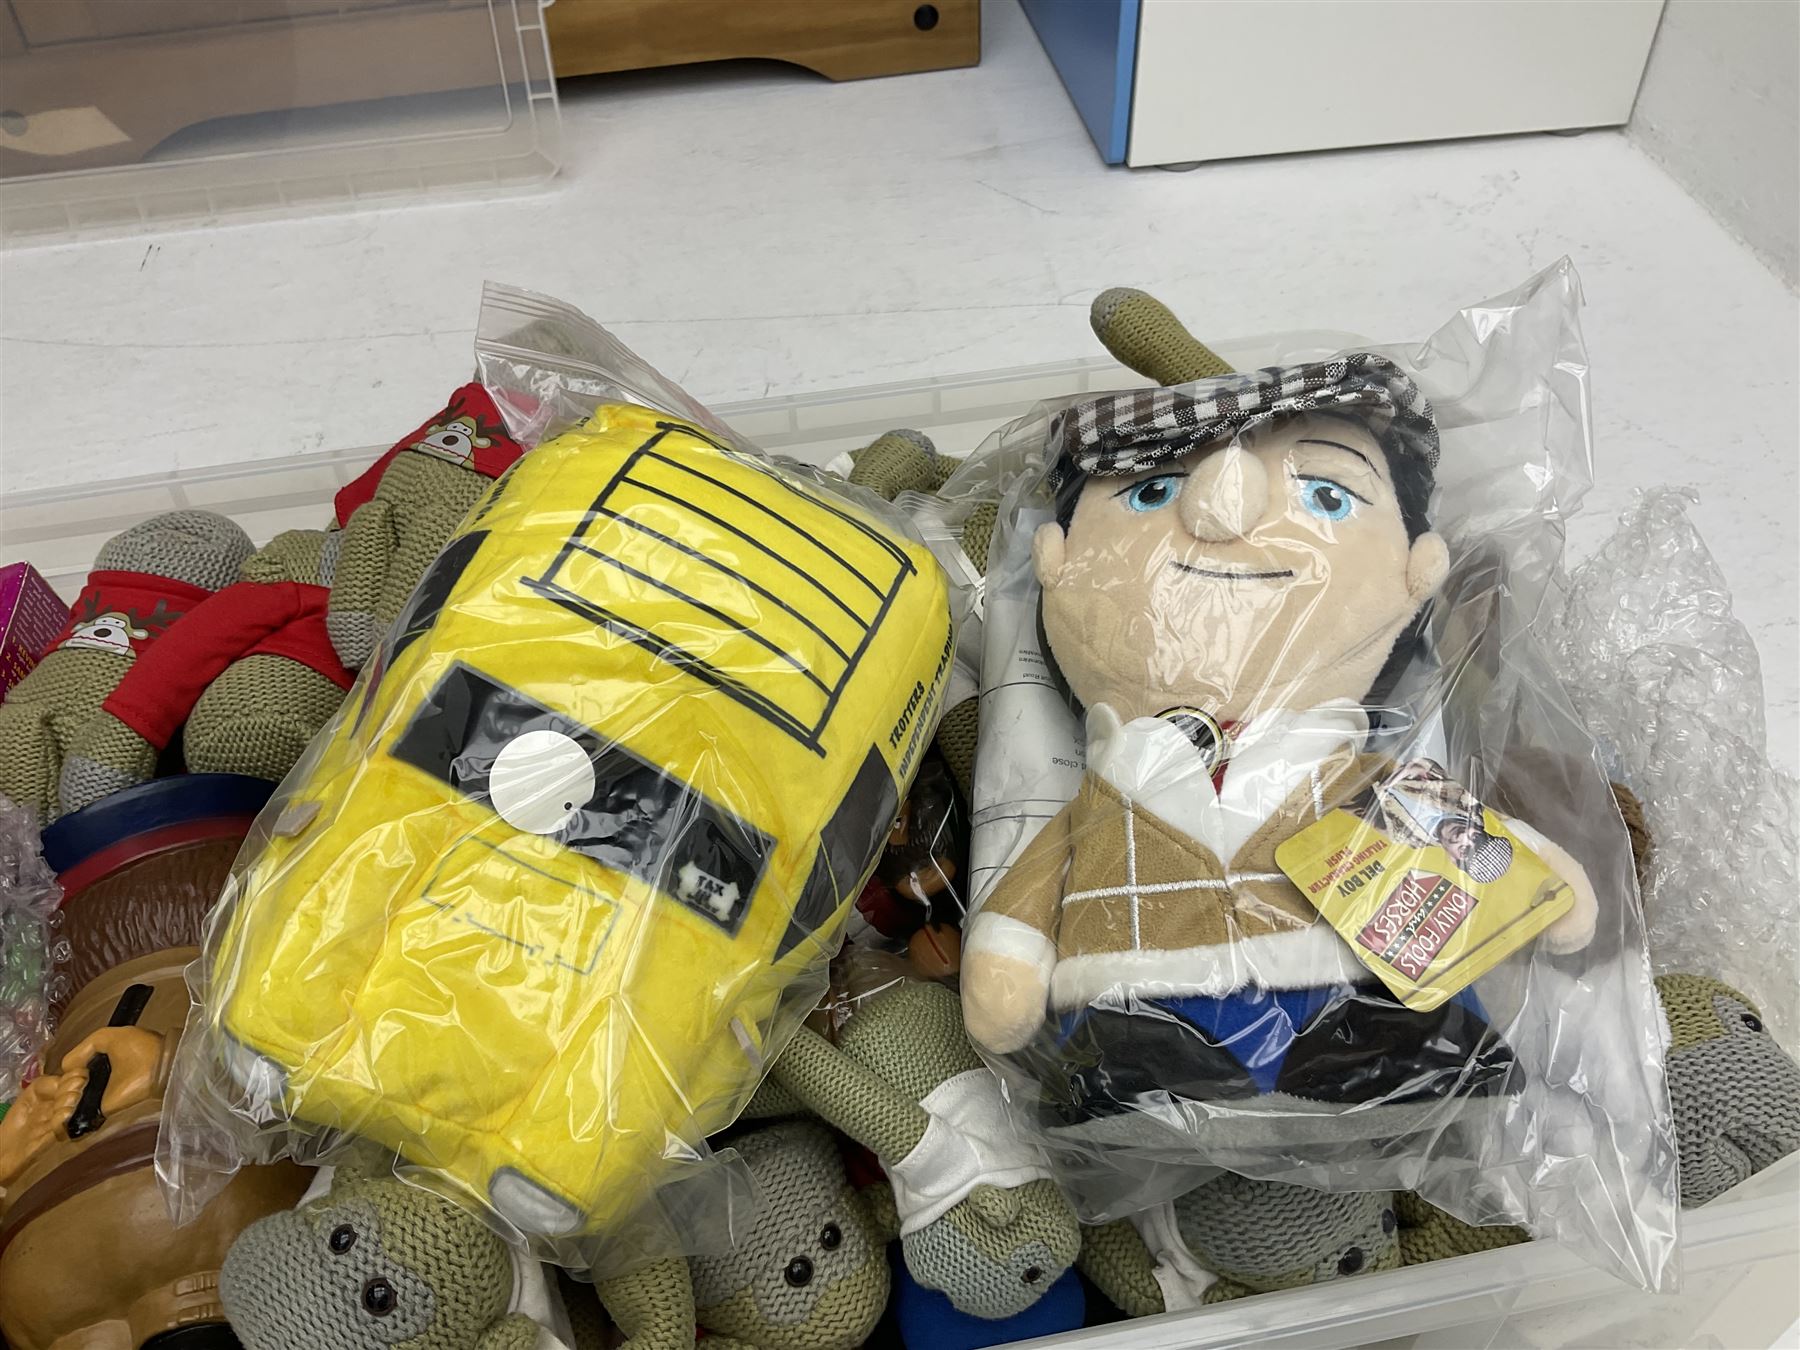 Only Fools and Horses stuffed toys - Image 5 of 7